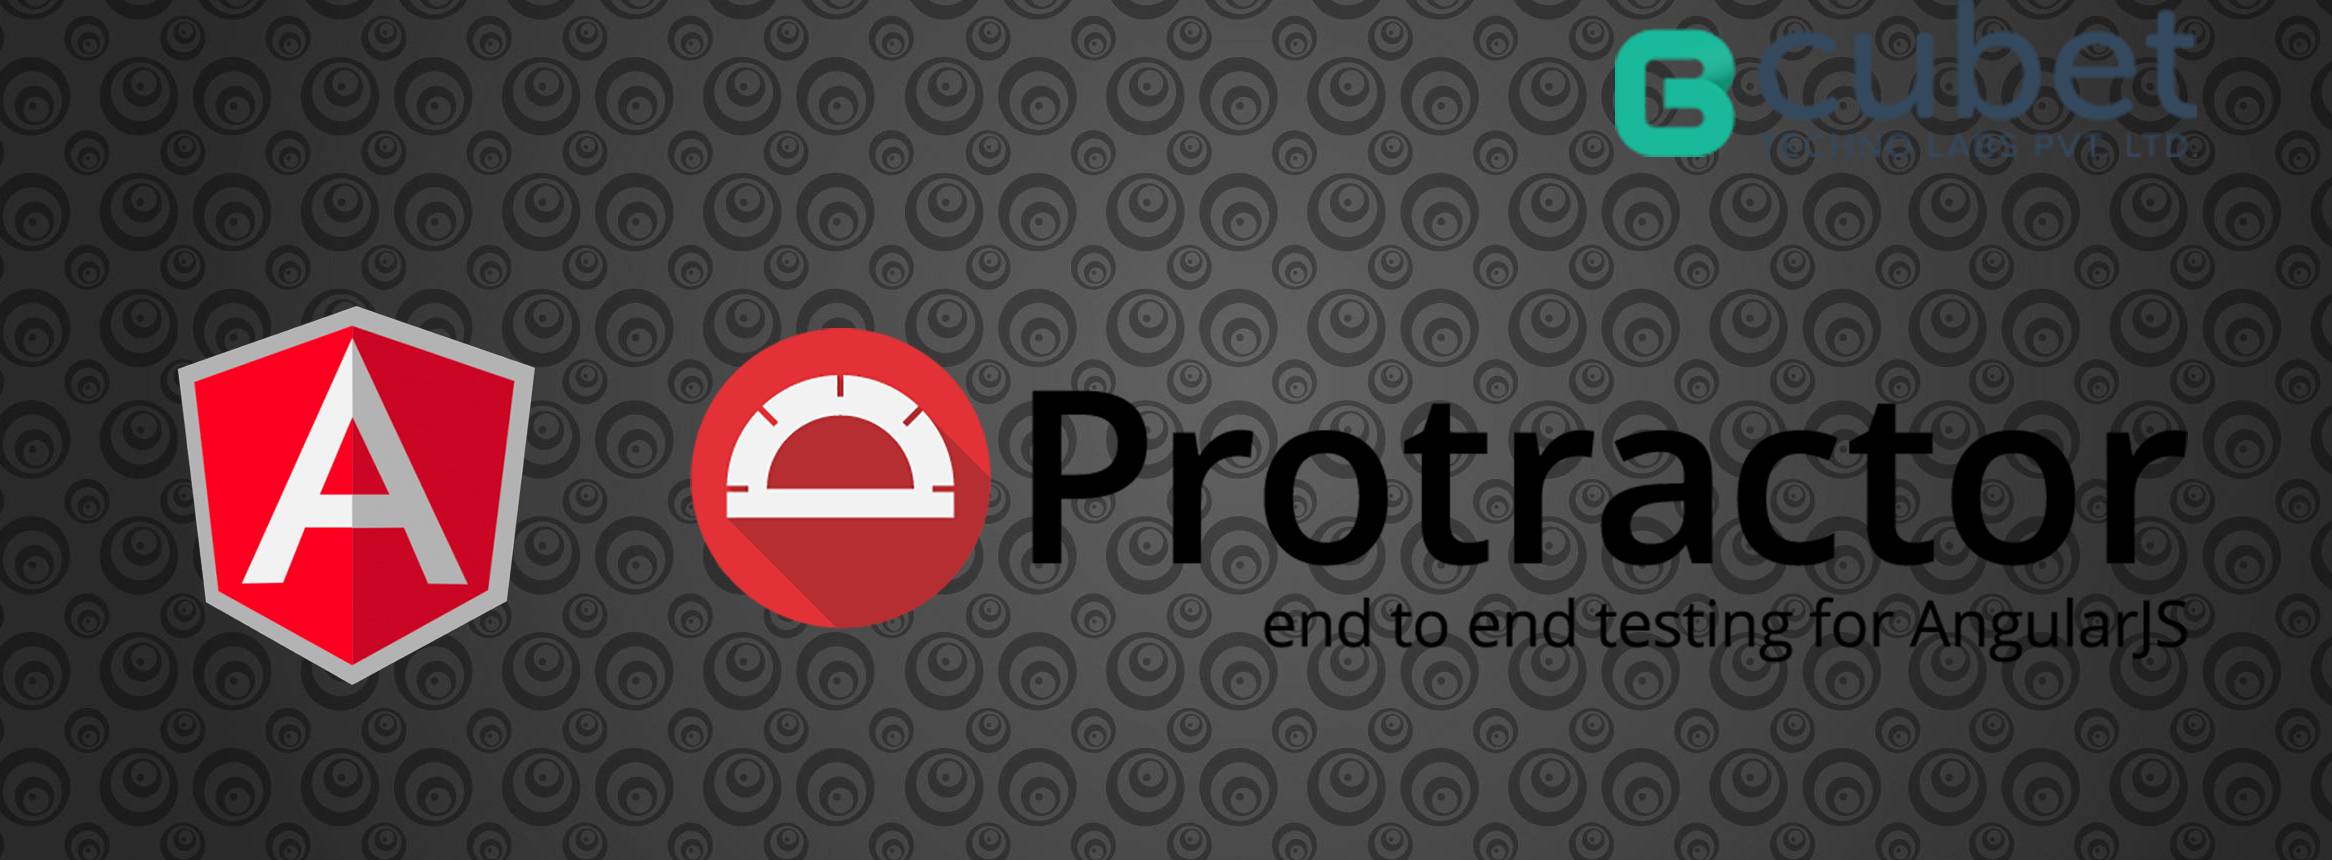 Automated Testing With Protractor Upon Angularjs Application